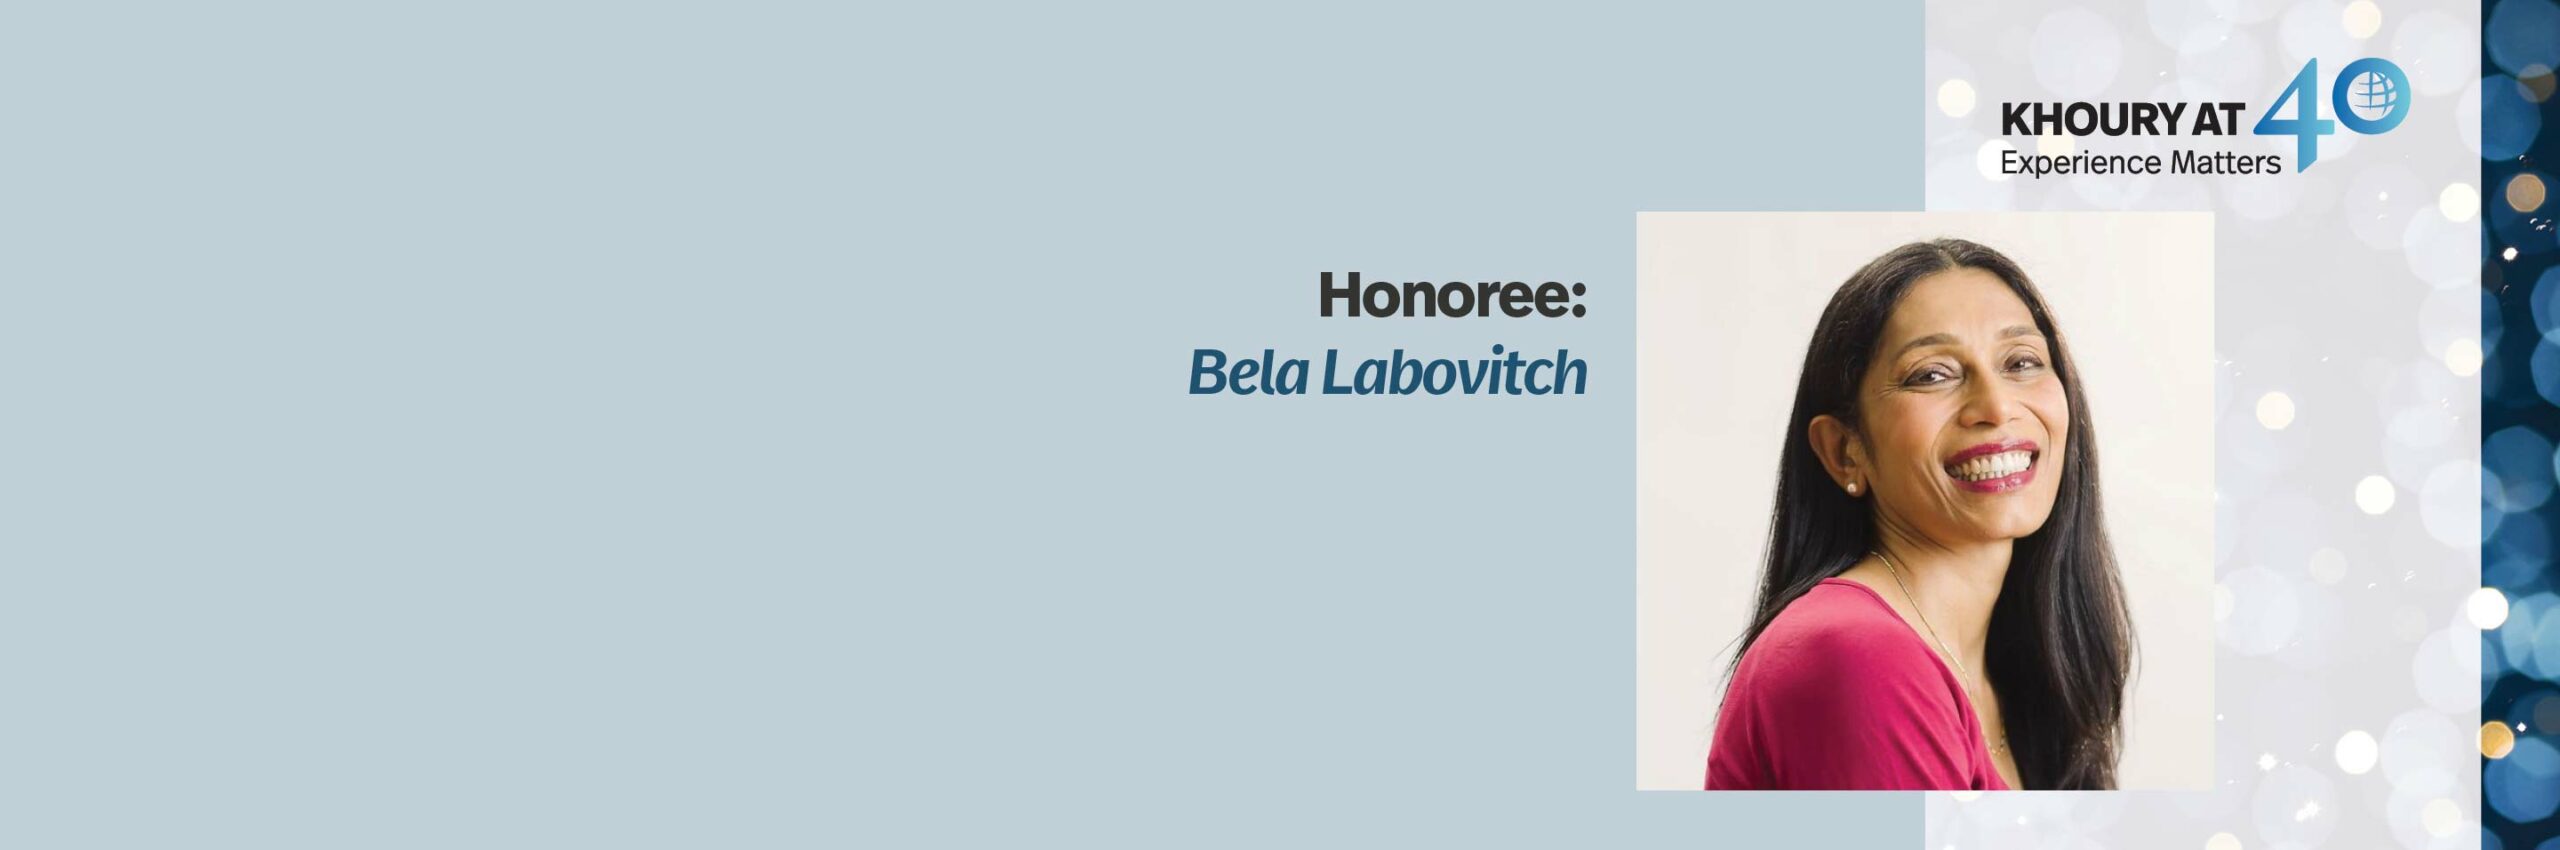 40 for 40 Honoree Profile: Bela Labovitch